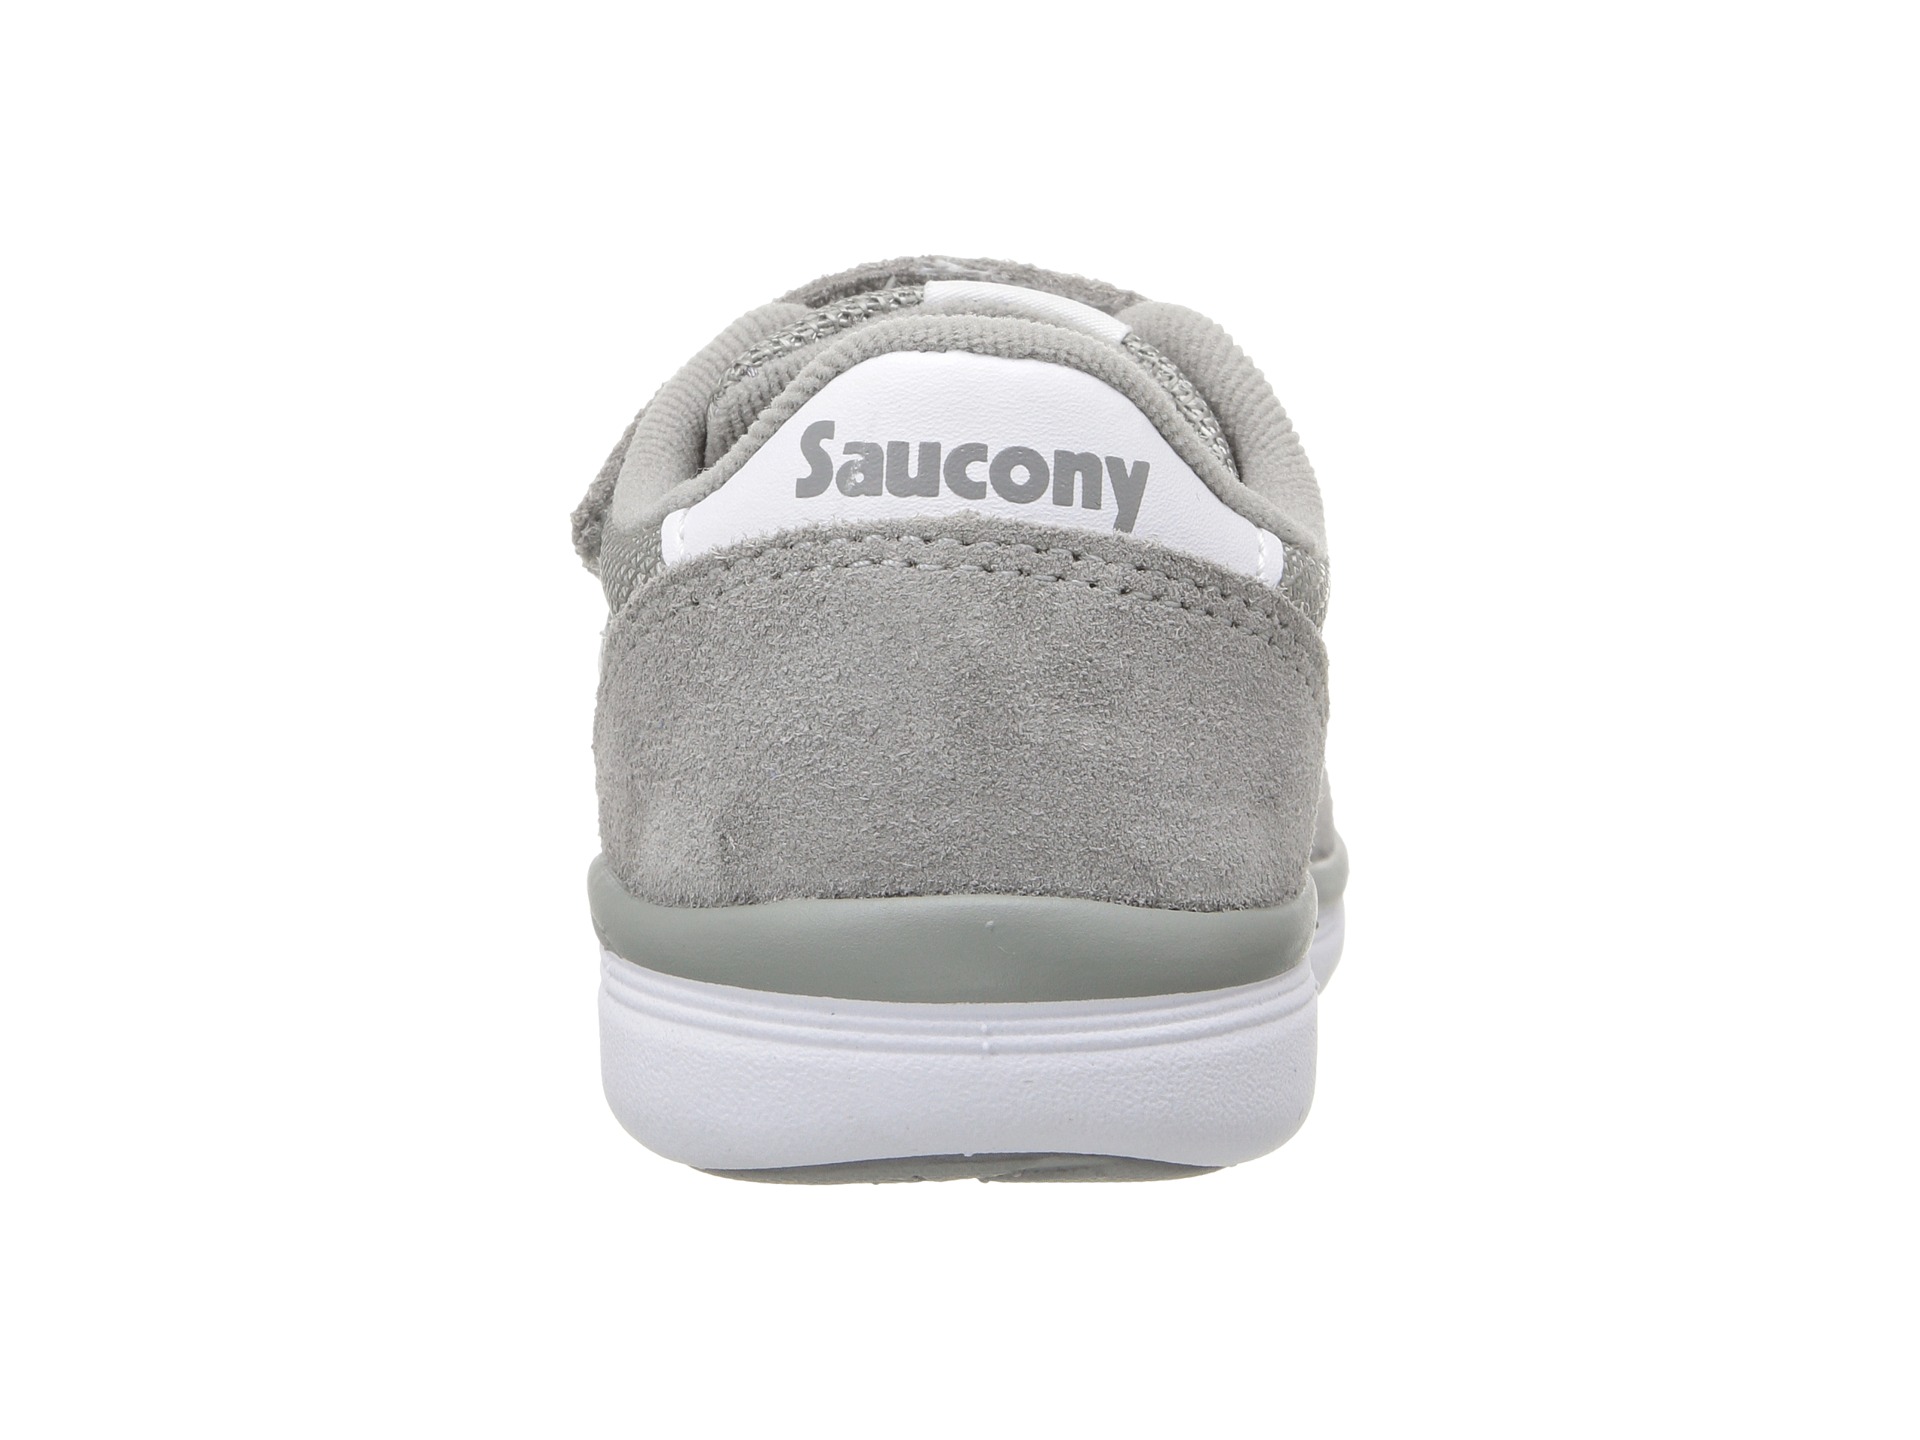 Saucony Toddler Size Chart